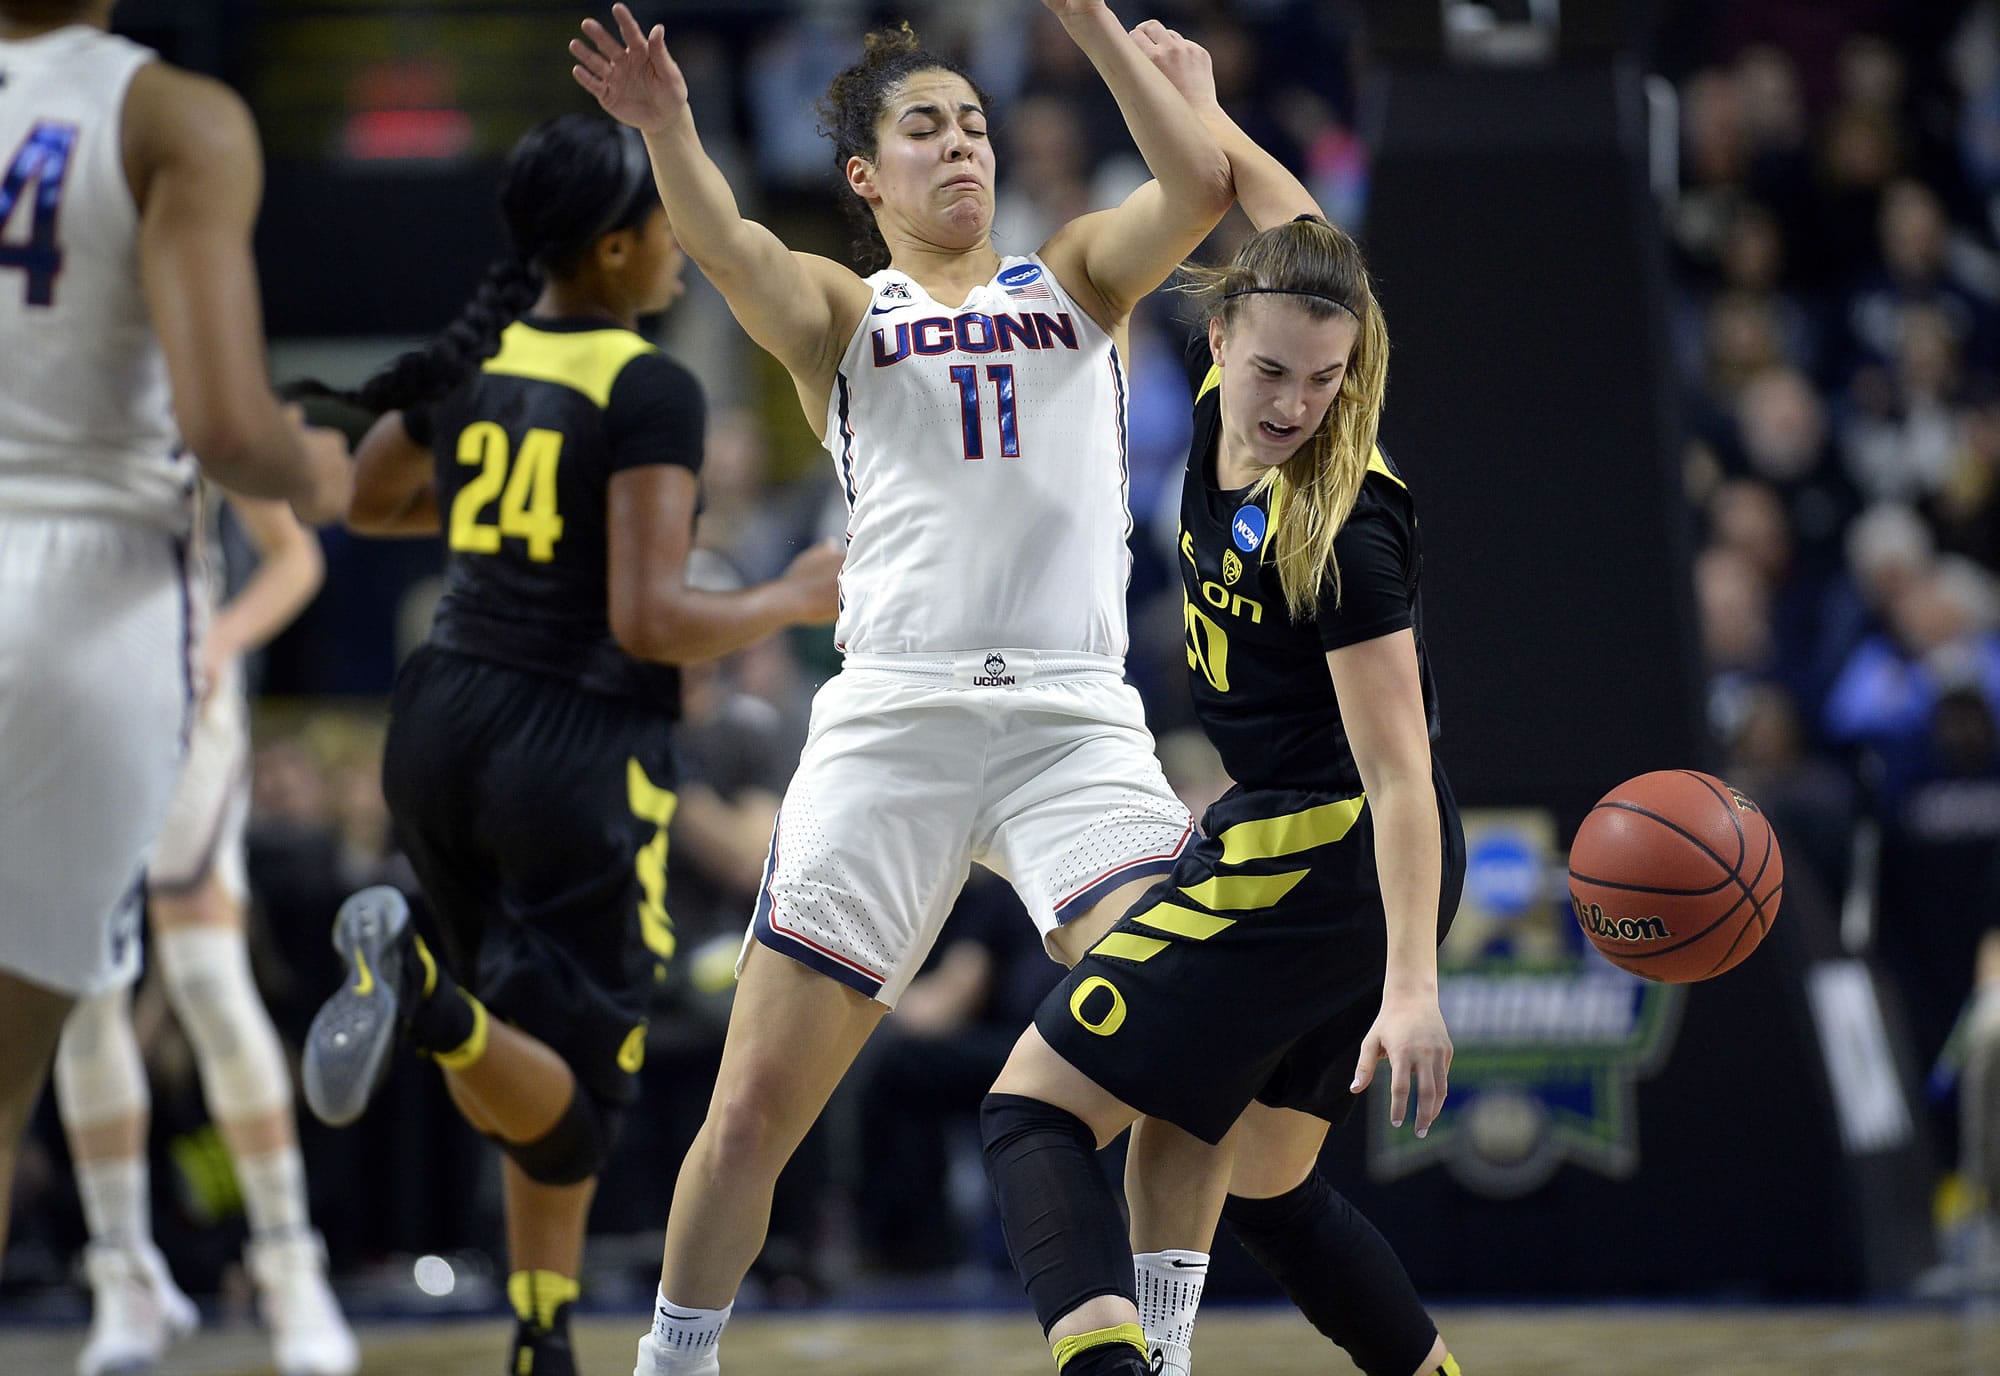 Oregon's Sabrina Ionescu, right, tries to gather the ball after running into the defense by Connecticut's Kia Nurse during the first half of a regional final game in the NCAA women's college basketball tournament, Monday, March 27, 2017, in Bridgeport, Conn.